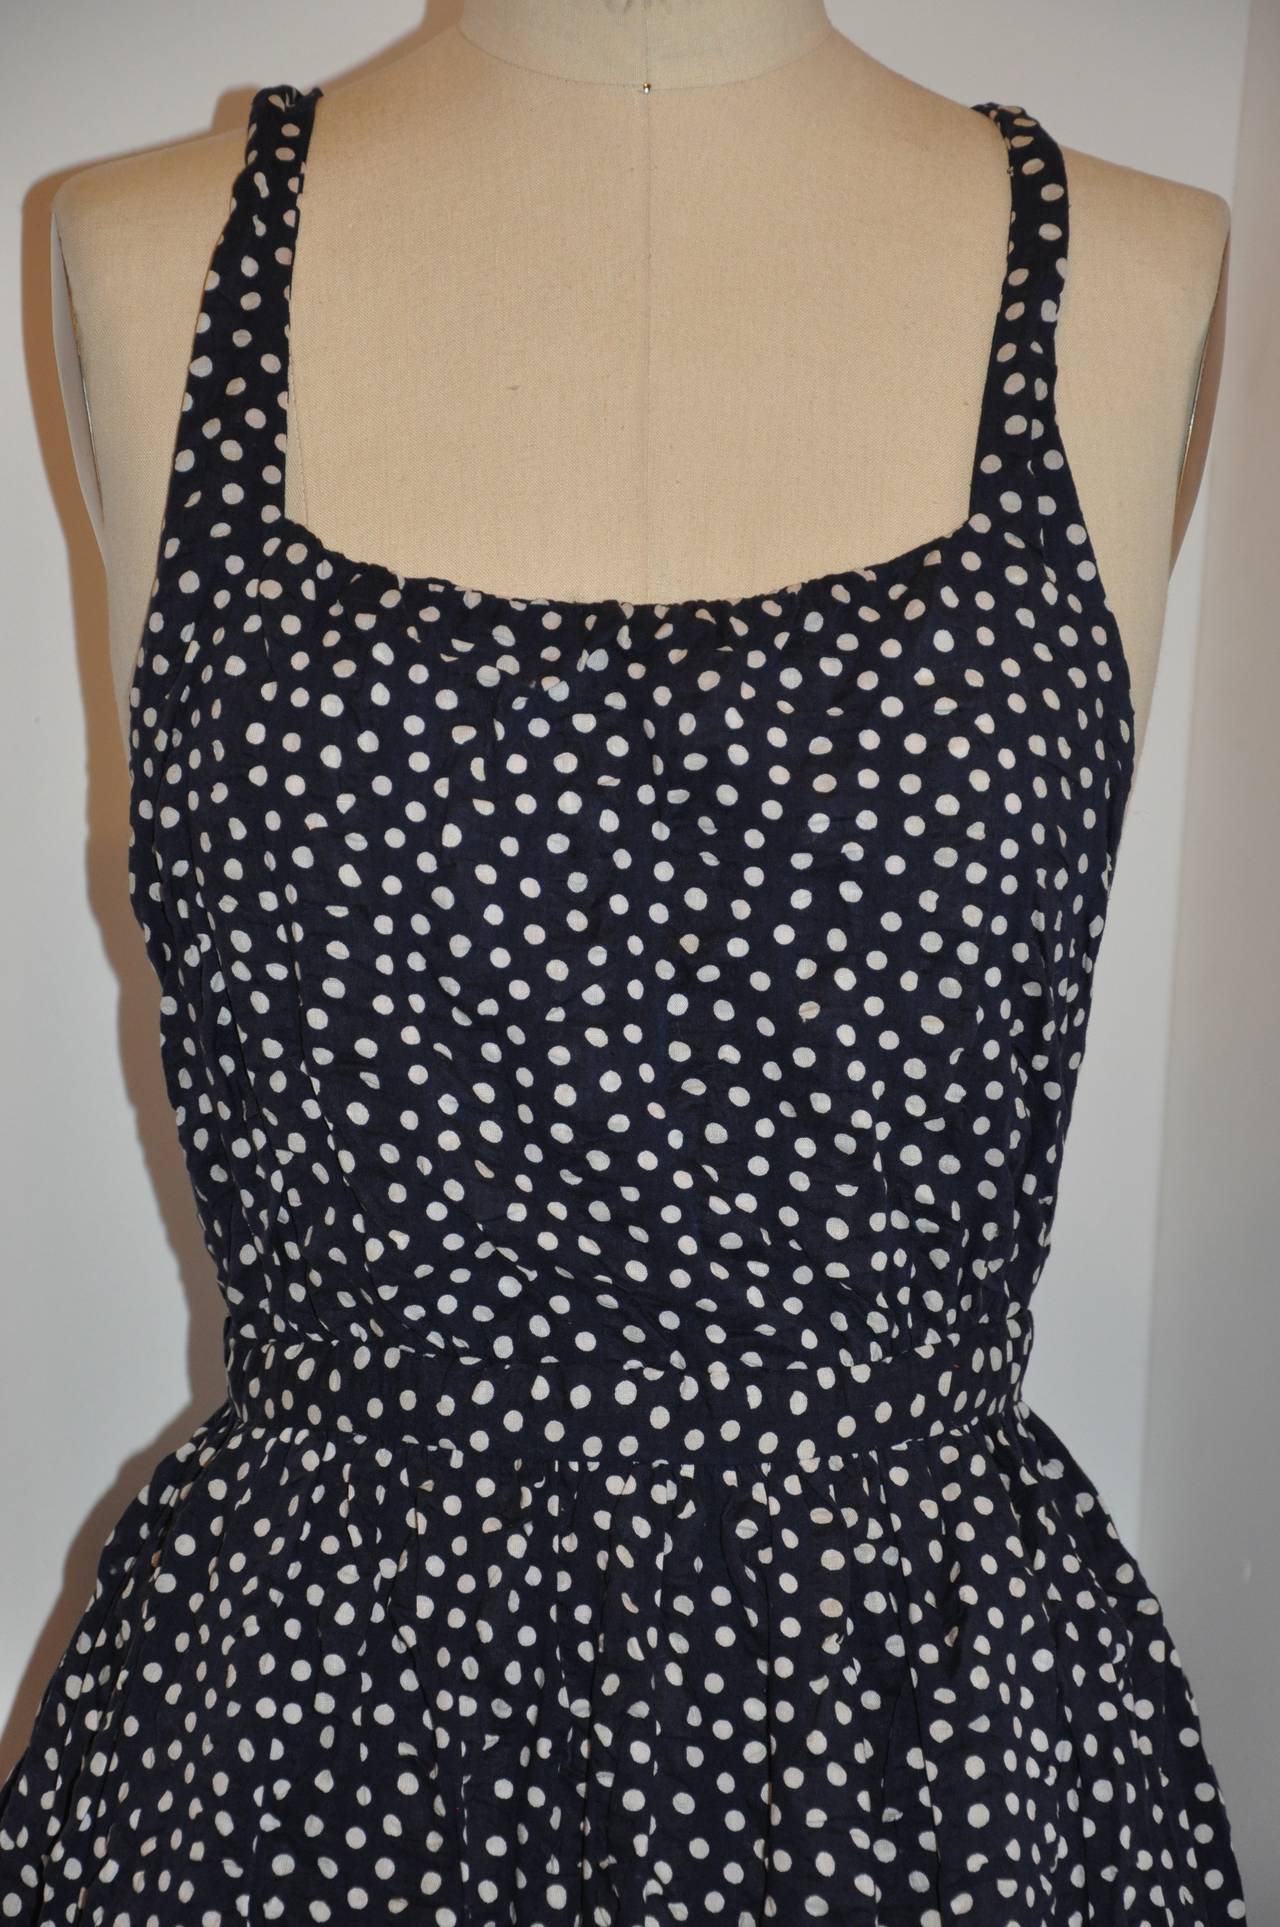 Halston's wonderful navy & white polka-dot sheersucker maxi dress is simply perfect for those hot summer days and nights.
   The waist measures 25